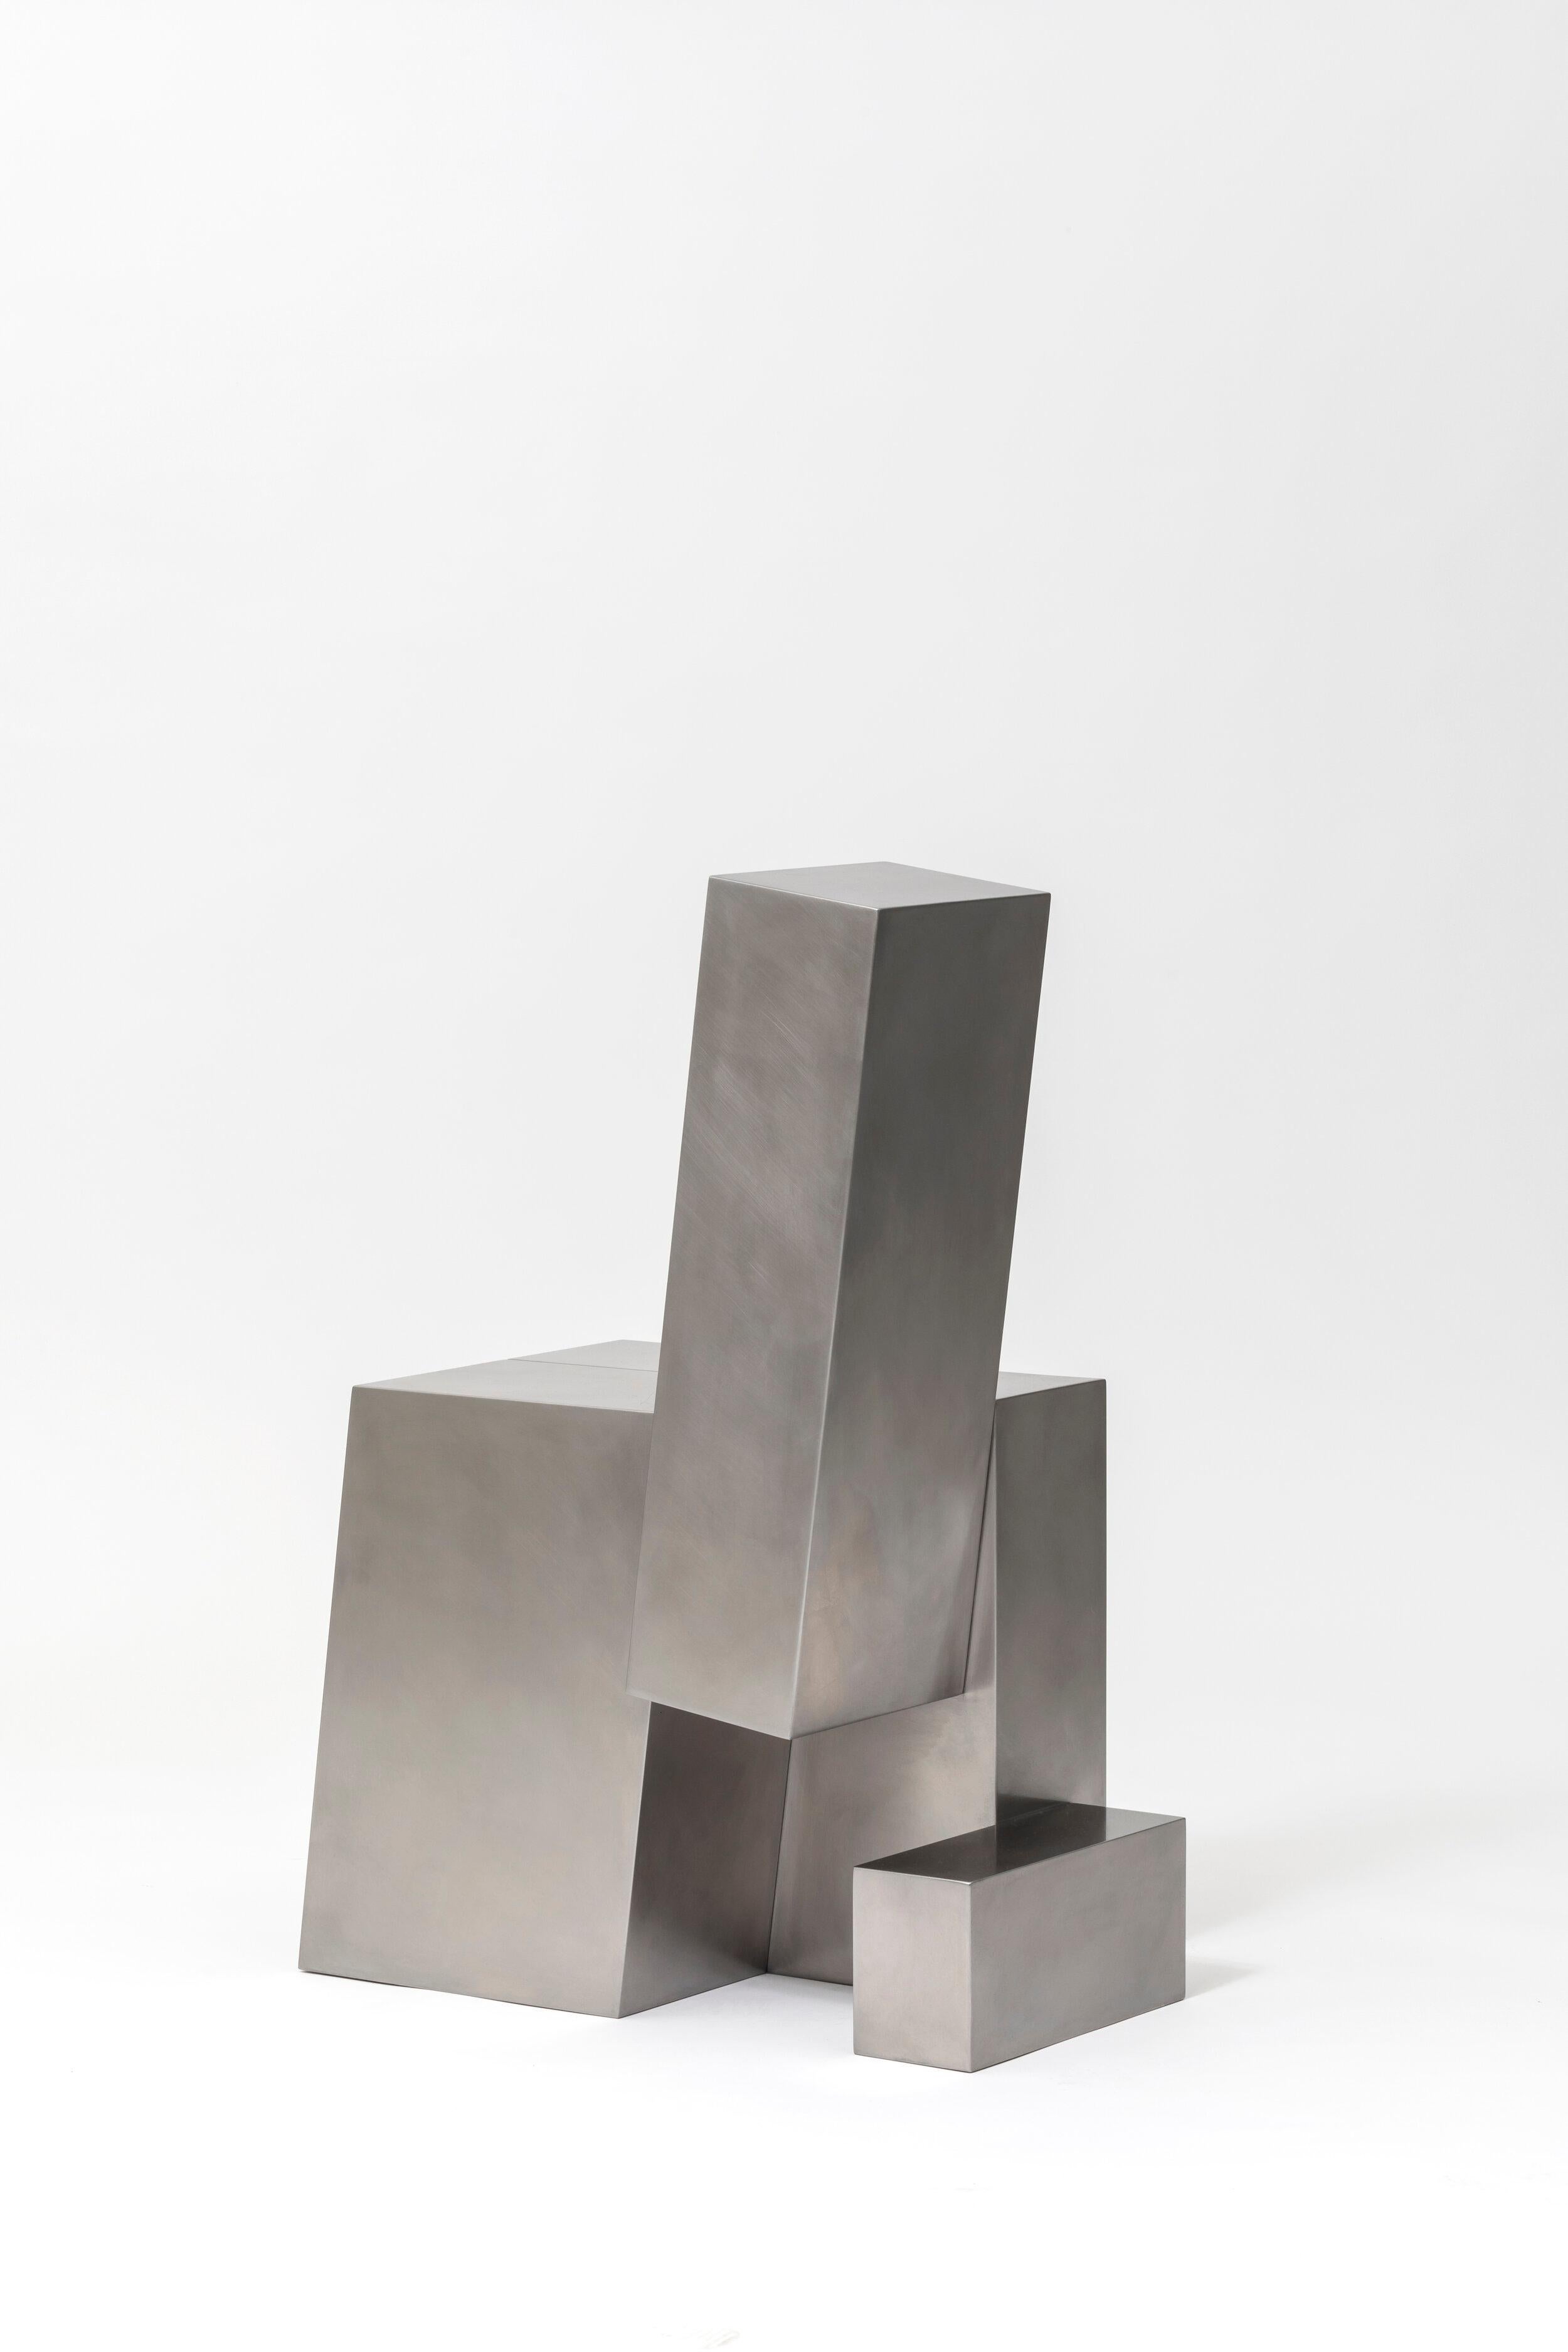 Layered steel seat XV by Hyungshin Hwang
Dimensions: D 37 x W 60 x H 84 cm
Materials: stainless steel

Layered Series is the main theme and concept of work of Hwang, who continues his experiment which is based on architectural composition of